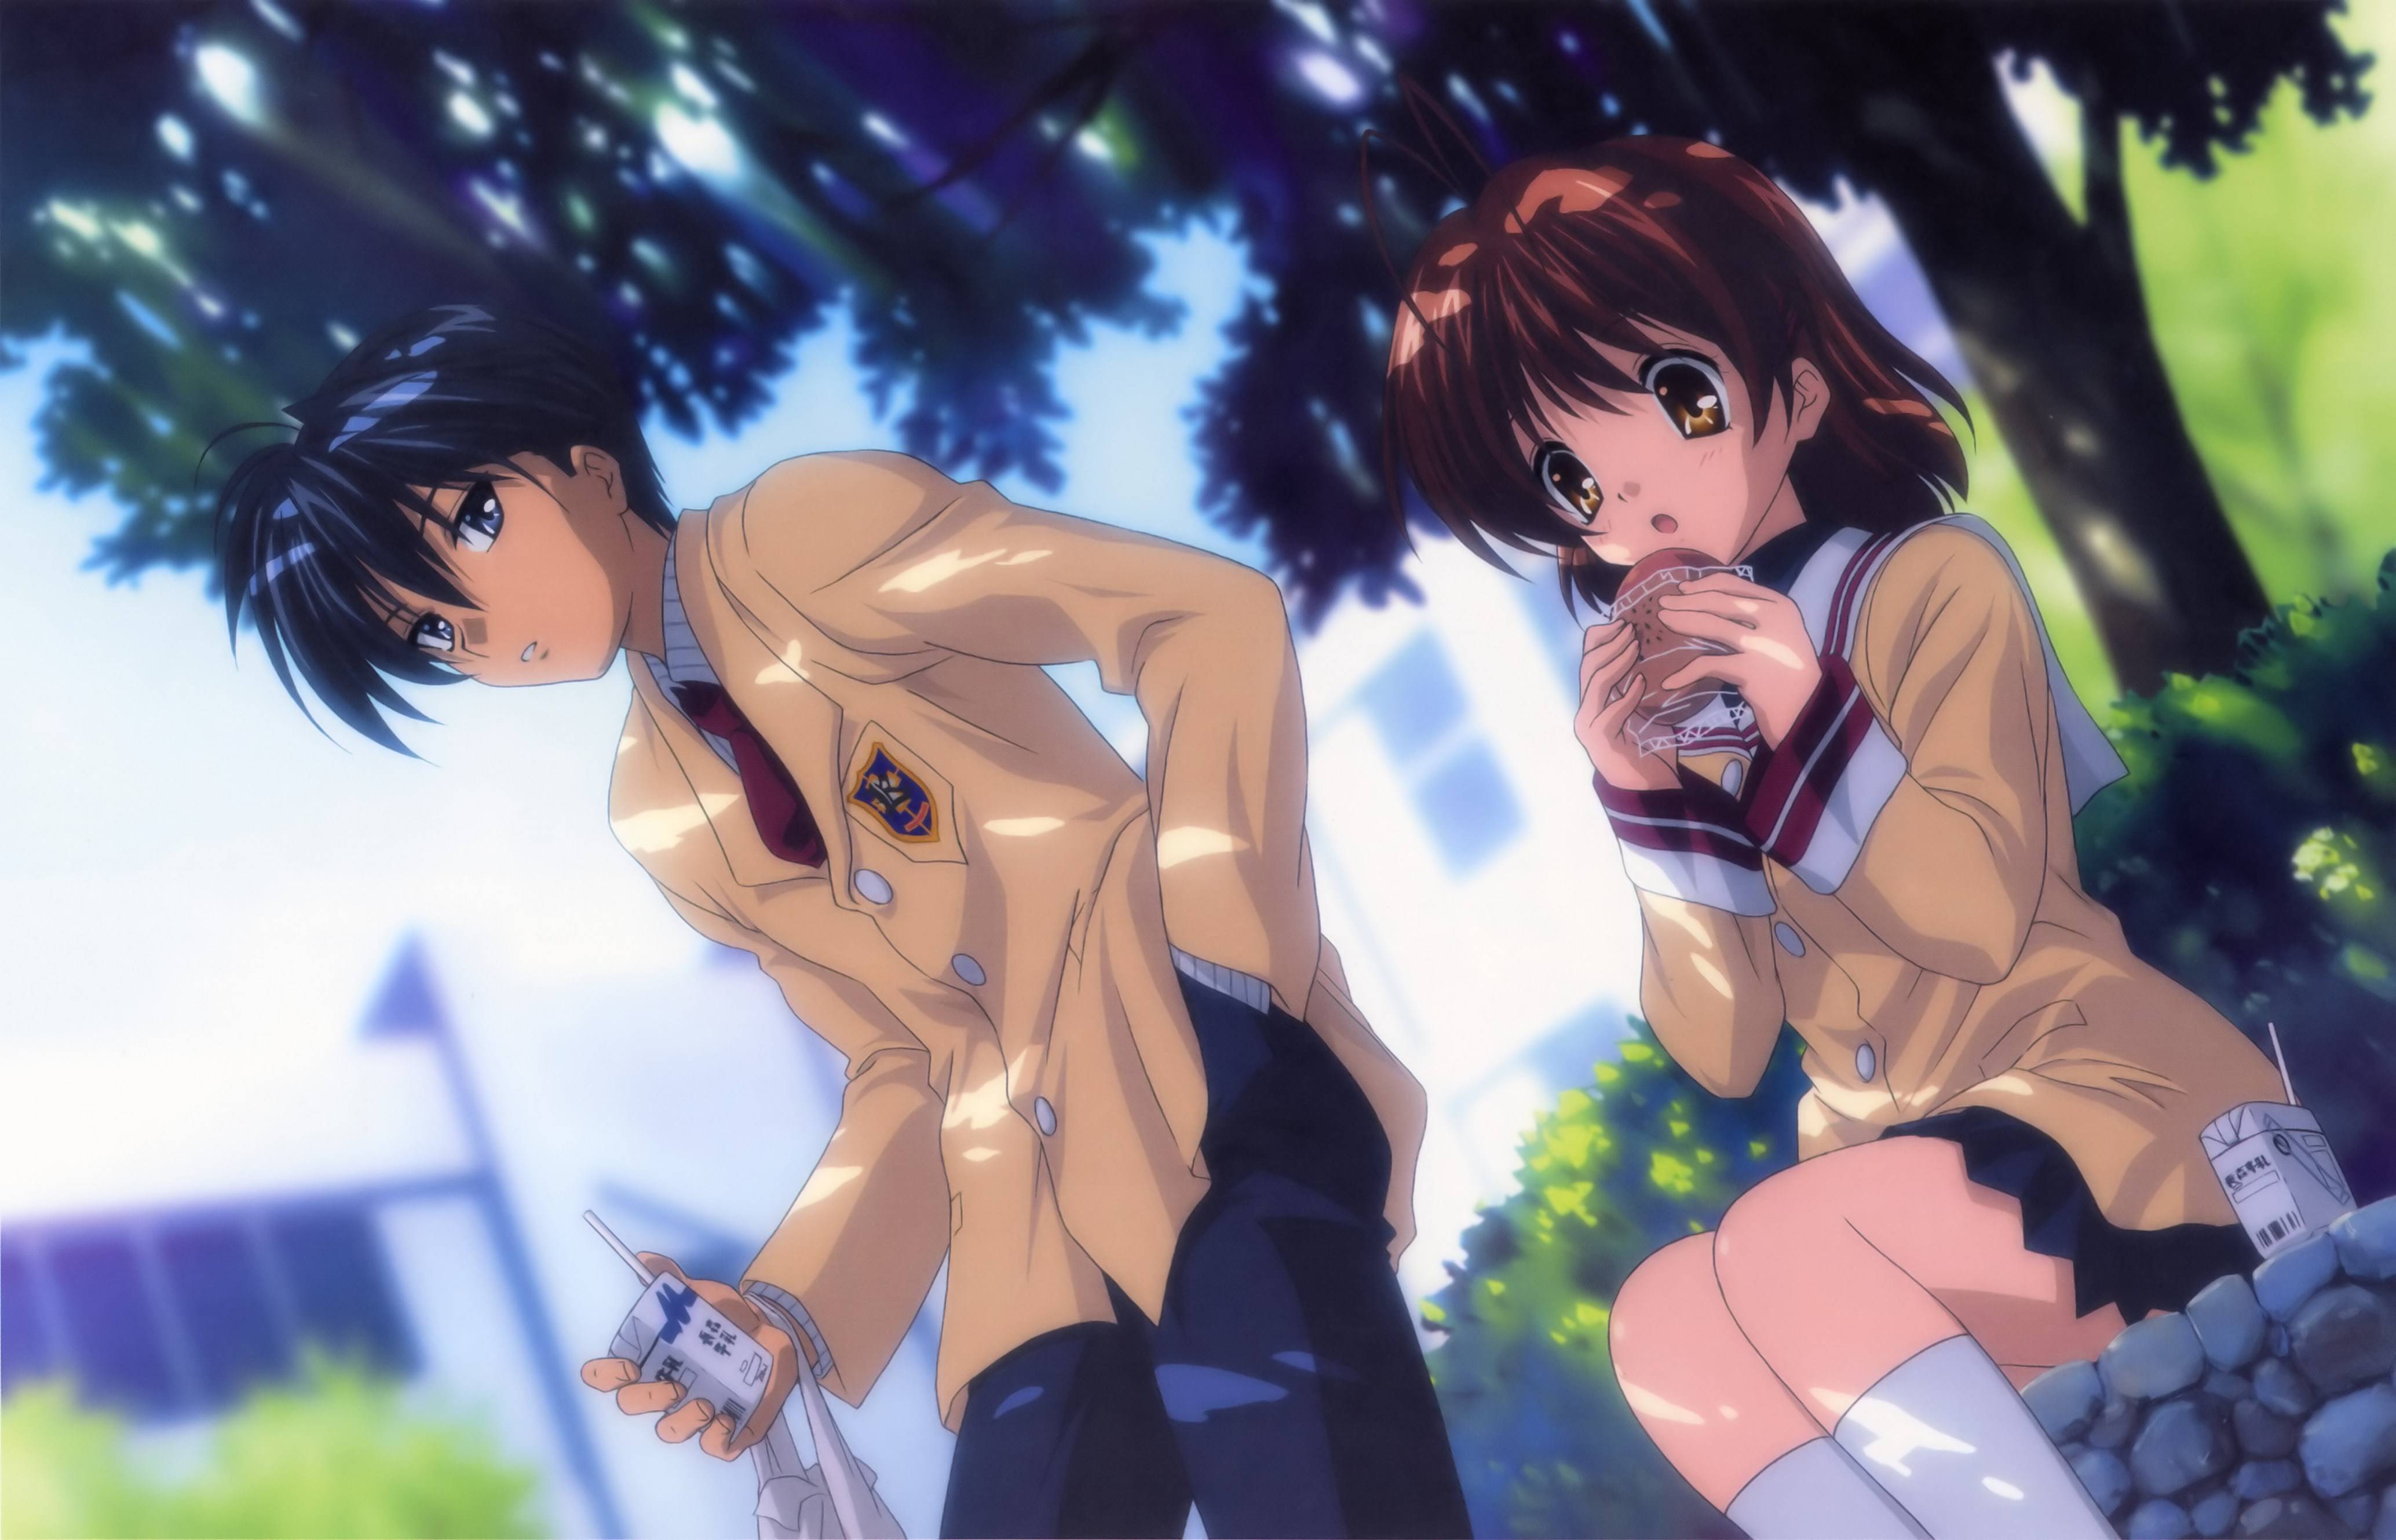 Anime Clannad HD Wallpaper, clannad characters - thirstymag.com